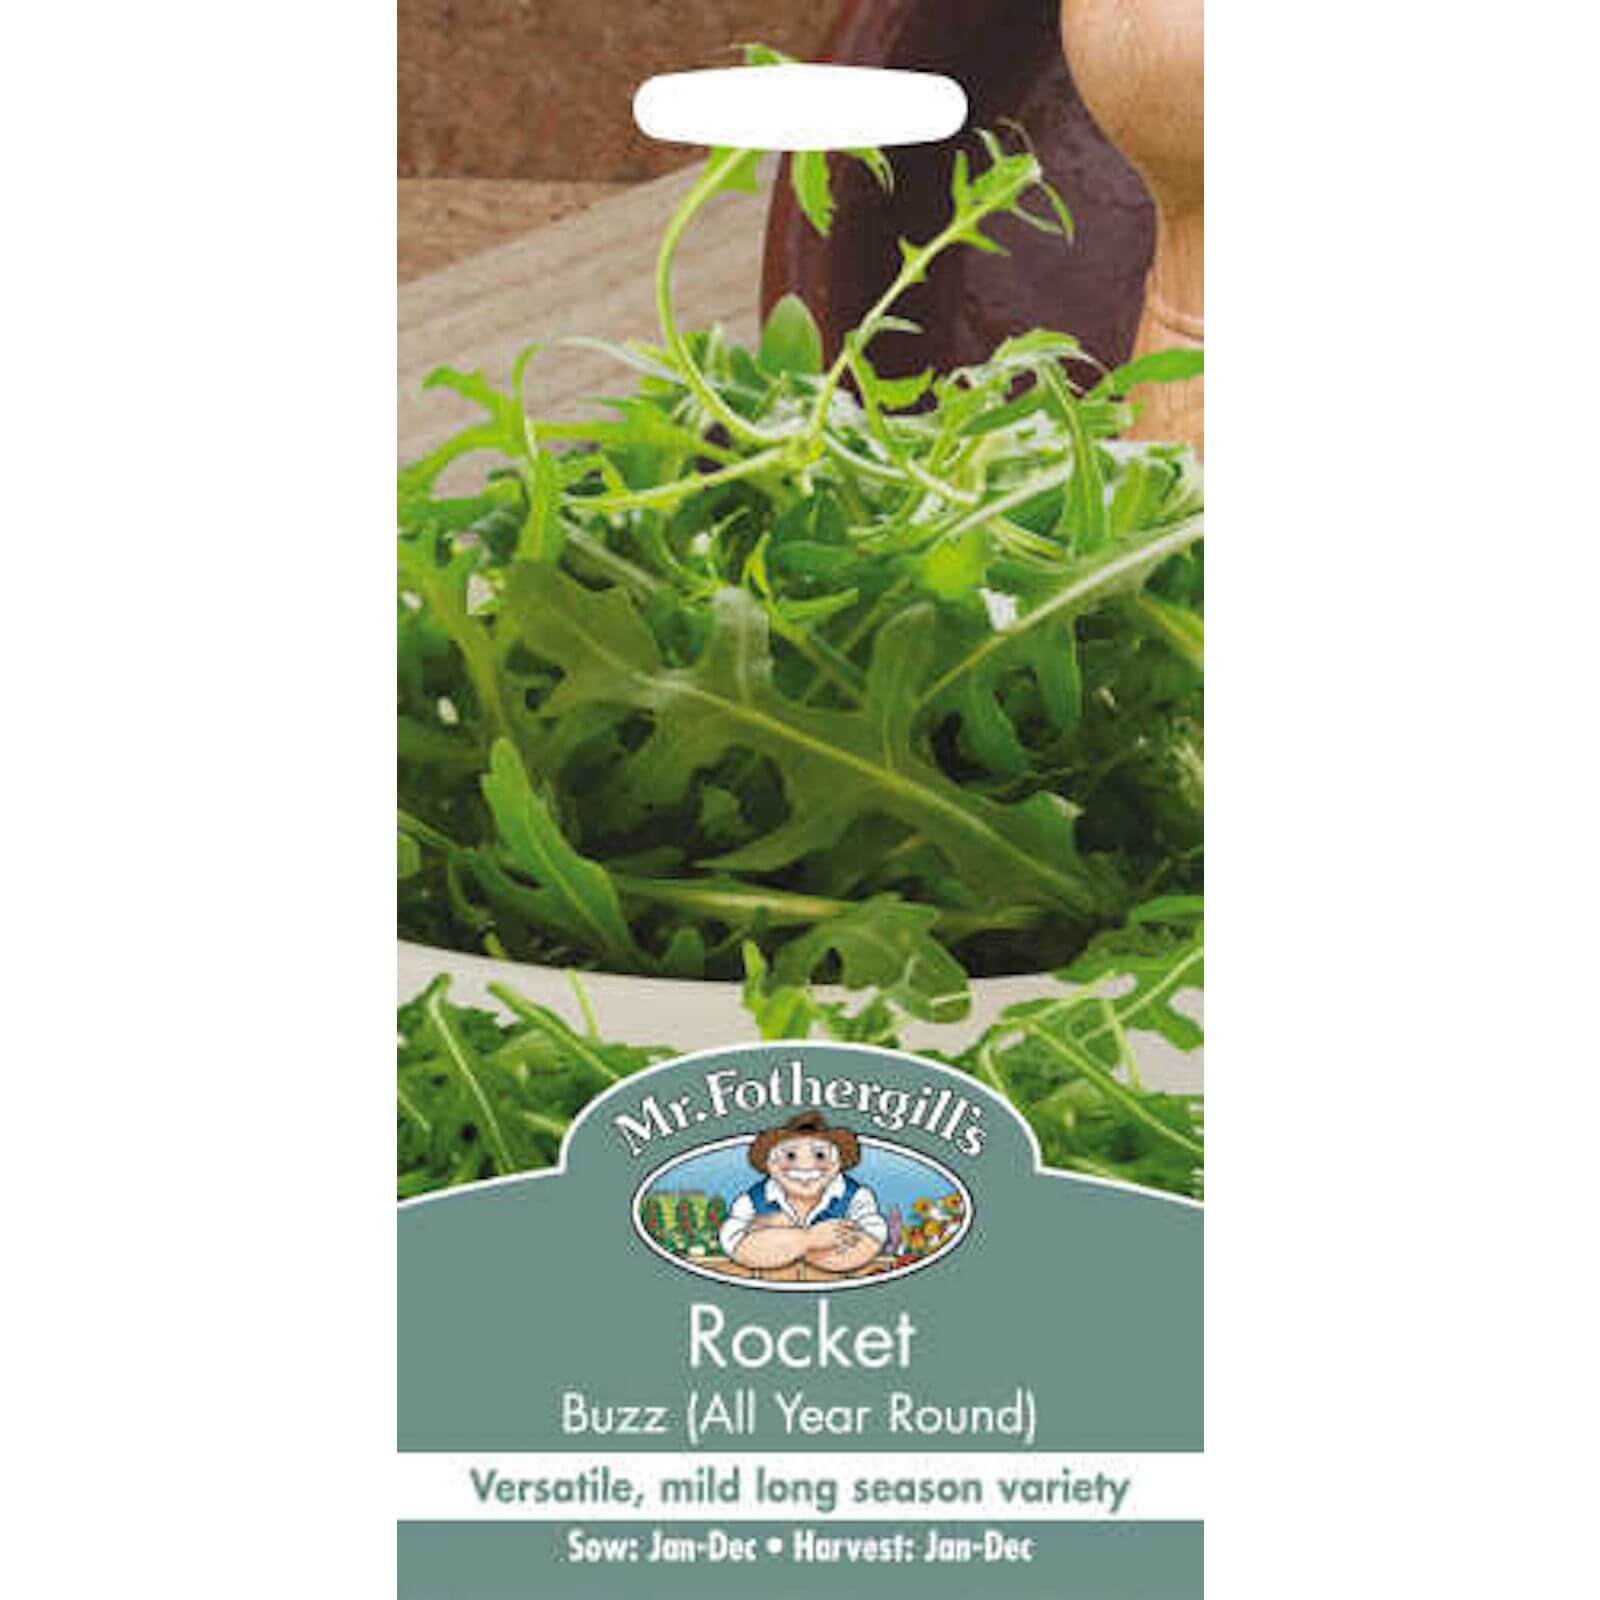 Mr. Fothergill's Rocket Buzz (All Year Round) Vegetable Seeds